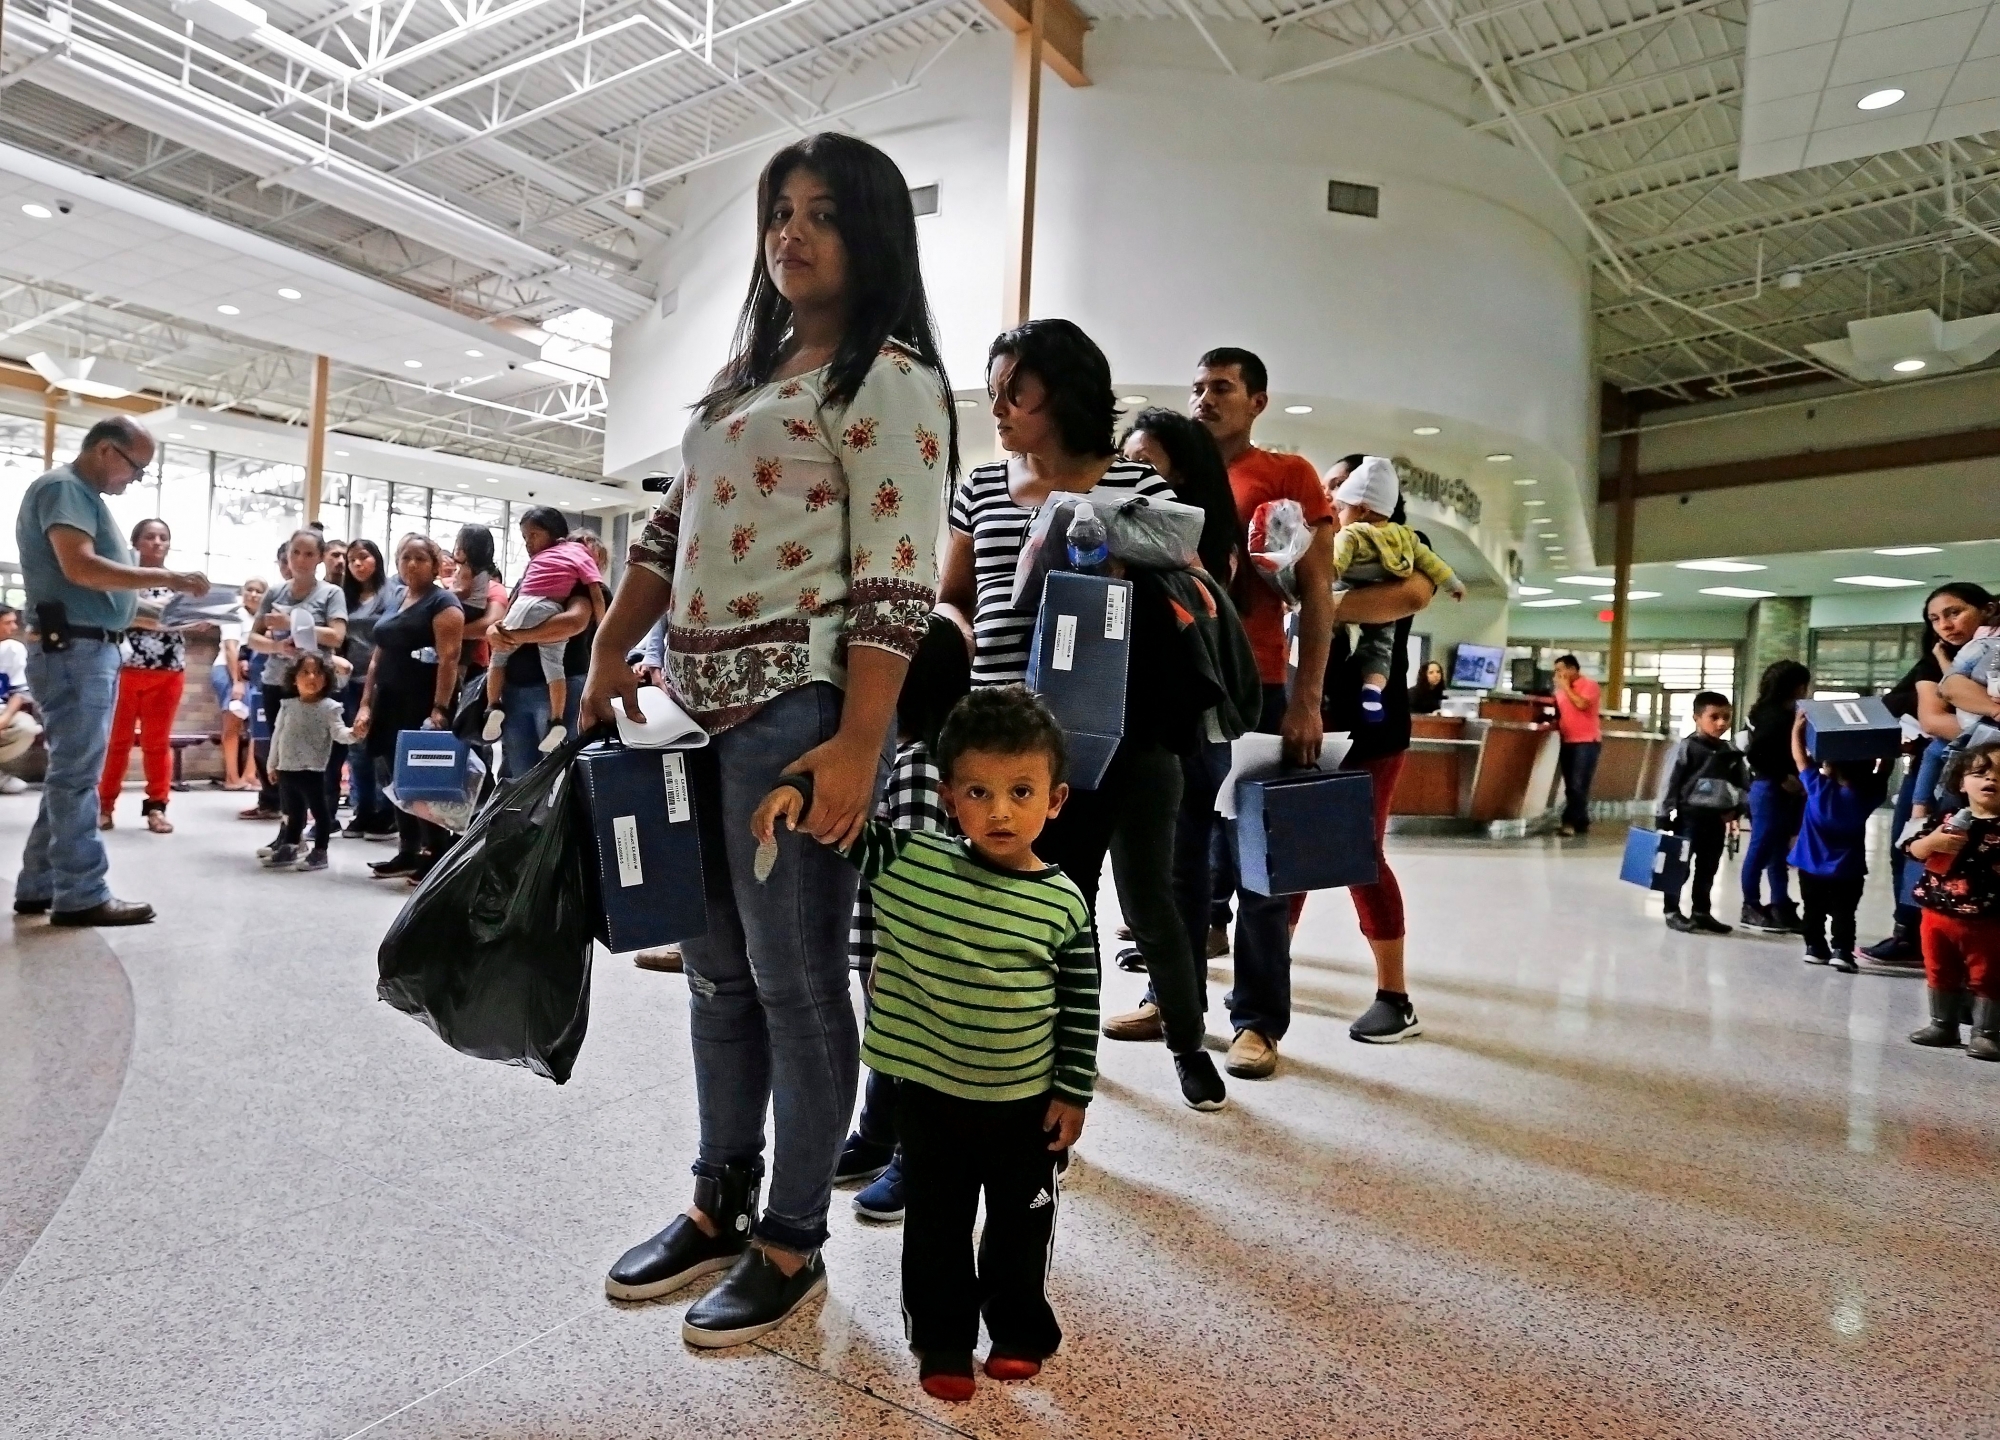 epa06843038 Migrant families are processed at the Central Bus Station before being taken to Catholic Charities in McAllen, Texas, USA, 26 June 2018. Immigration along the Rio Grande in Texas has become a political issue, due to the controversy surrounding the US Justice Department's suspended 'Zero Tolerance' policy of criminally prosecuting all migrants entering the country illegally and the now-reversed policy of separating migrant children from their parents.  EPA/LARRY W. SMITH USA IMMIGRATION